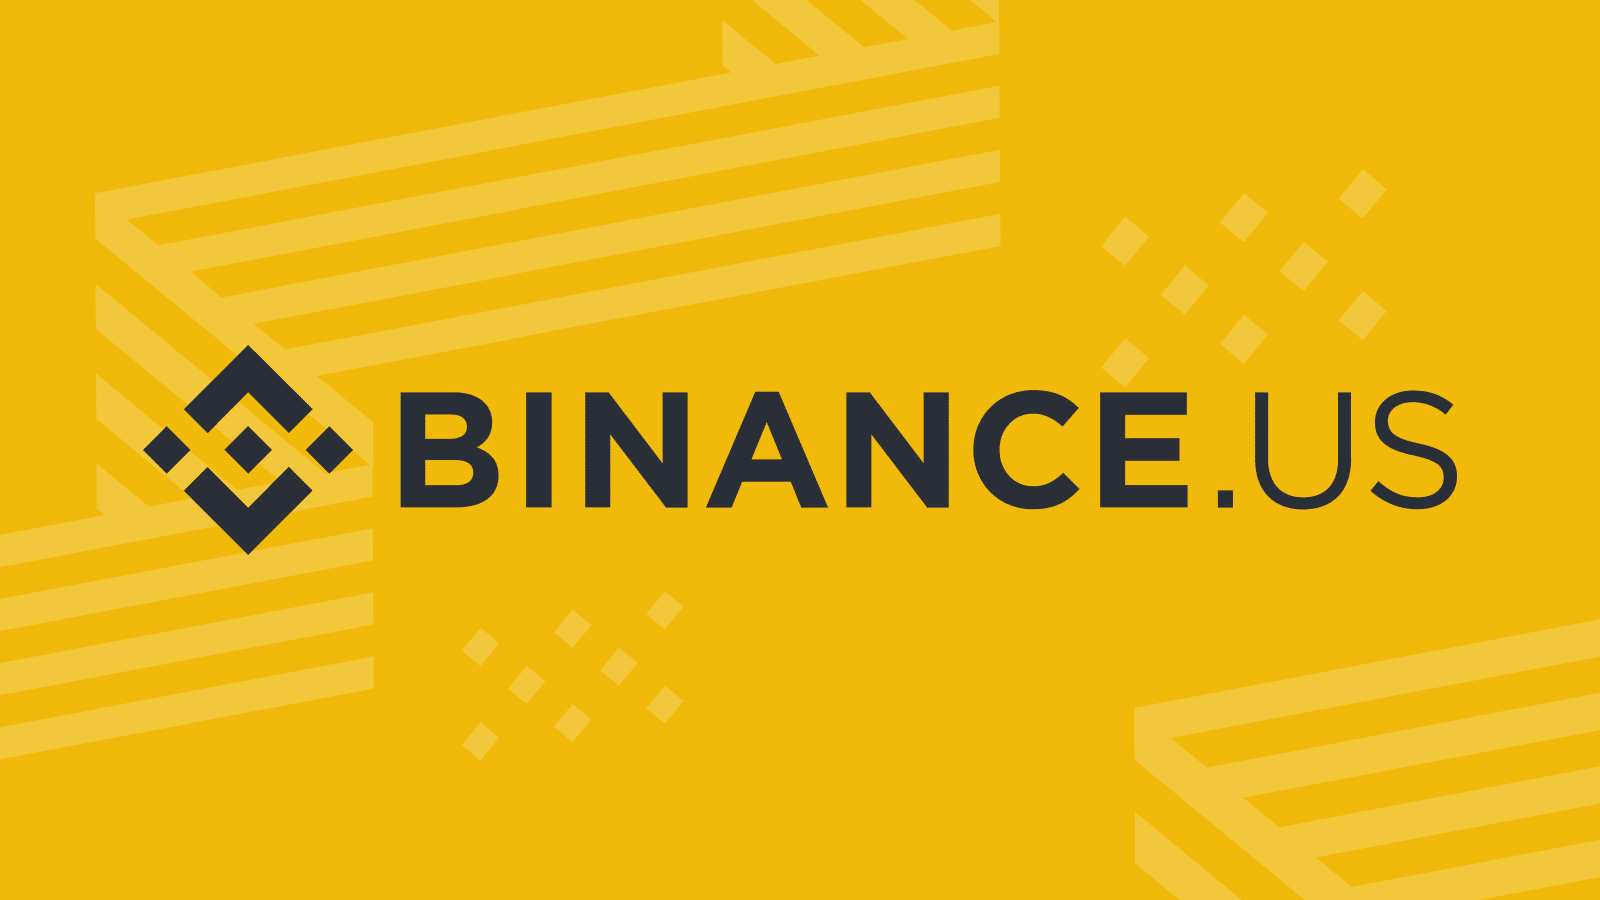 SEC Alleges Binance.US Has Not Been Complying – Seeks Court Intervention